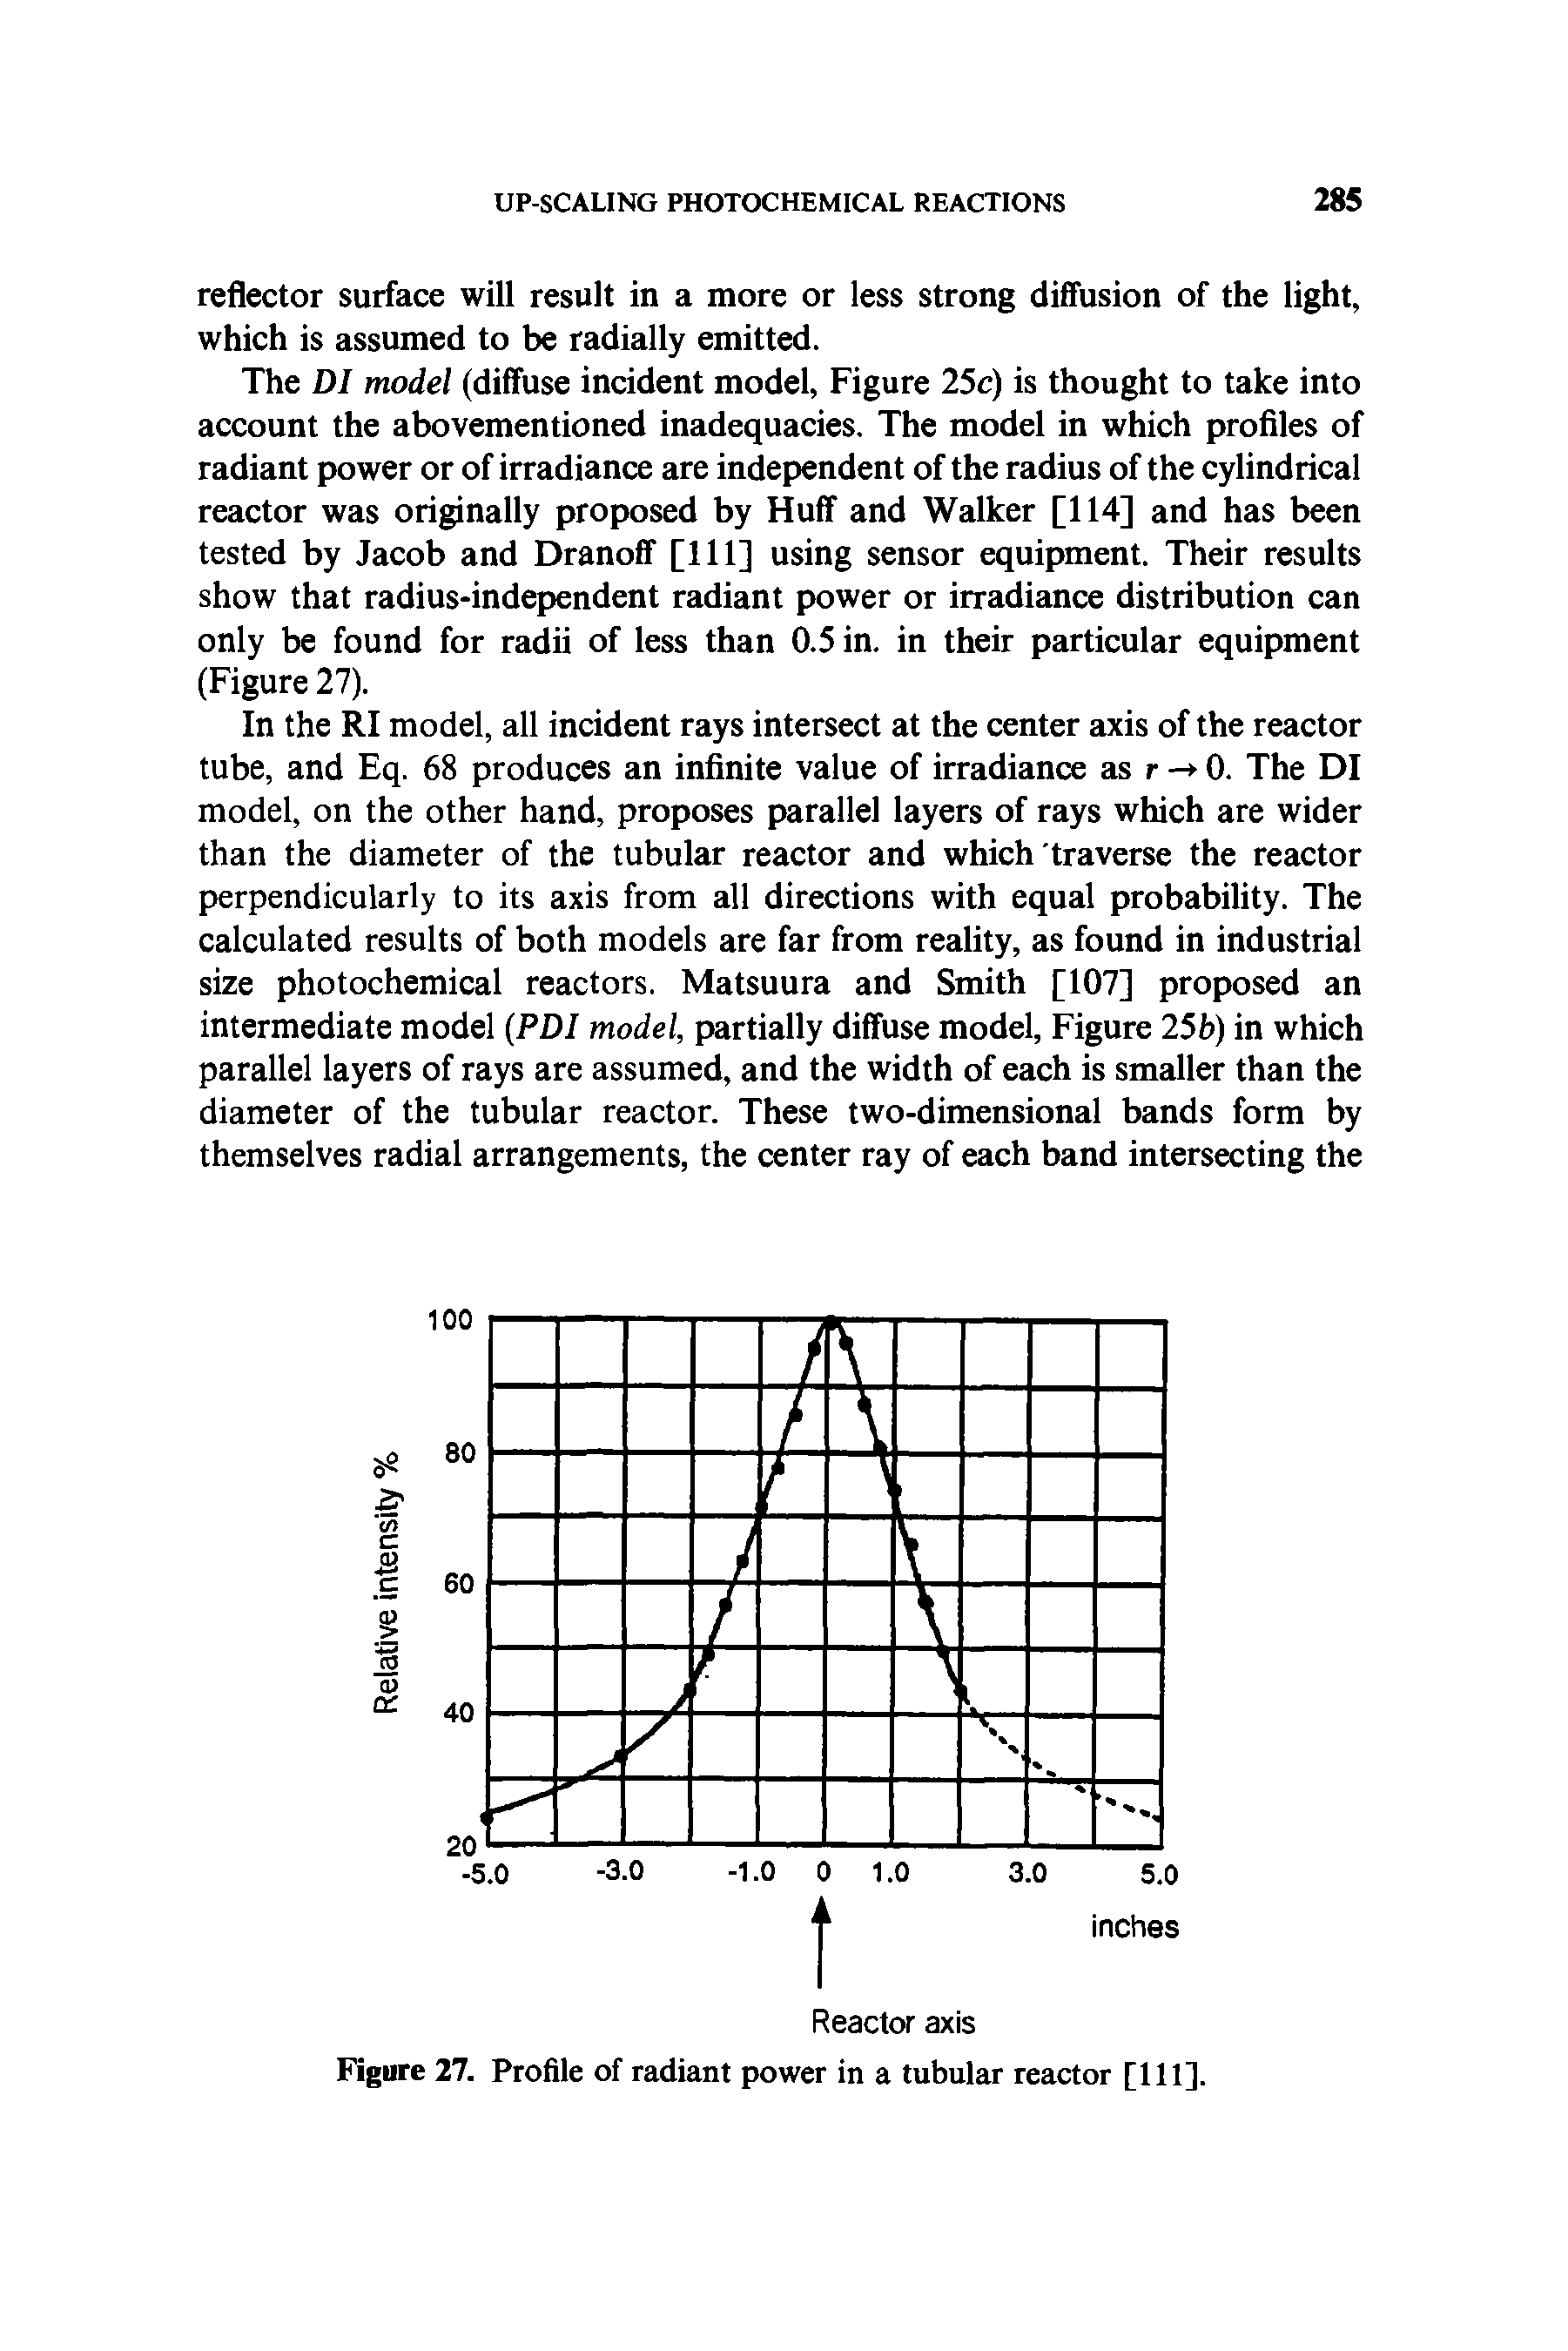 Figure 27. Profile of radiant power in a tubular reactor [111].